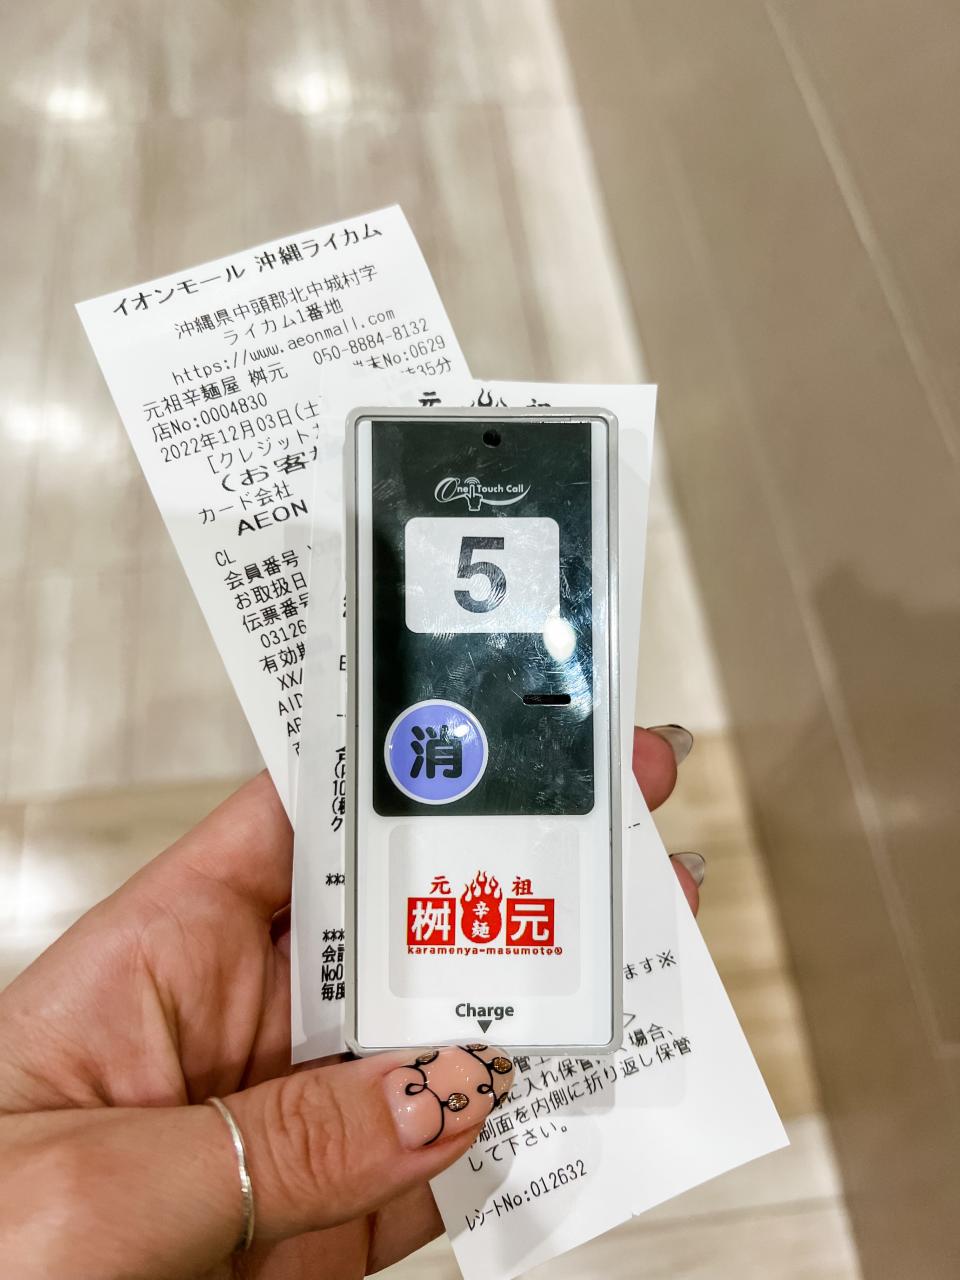 beeper from ordering at Japanese food court